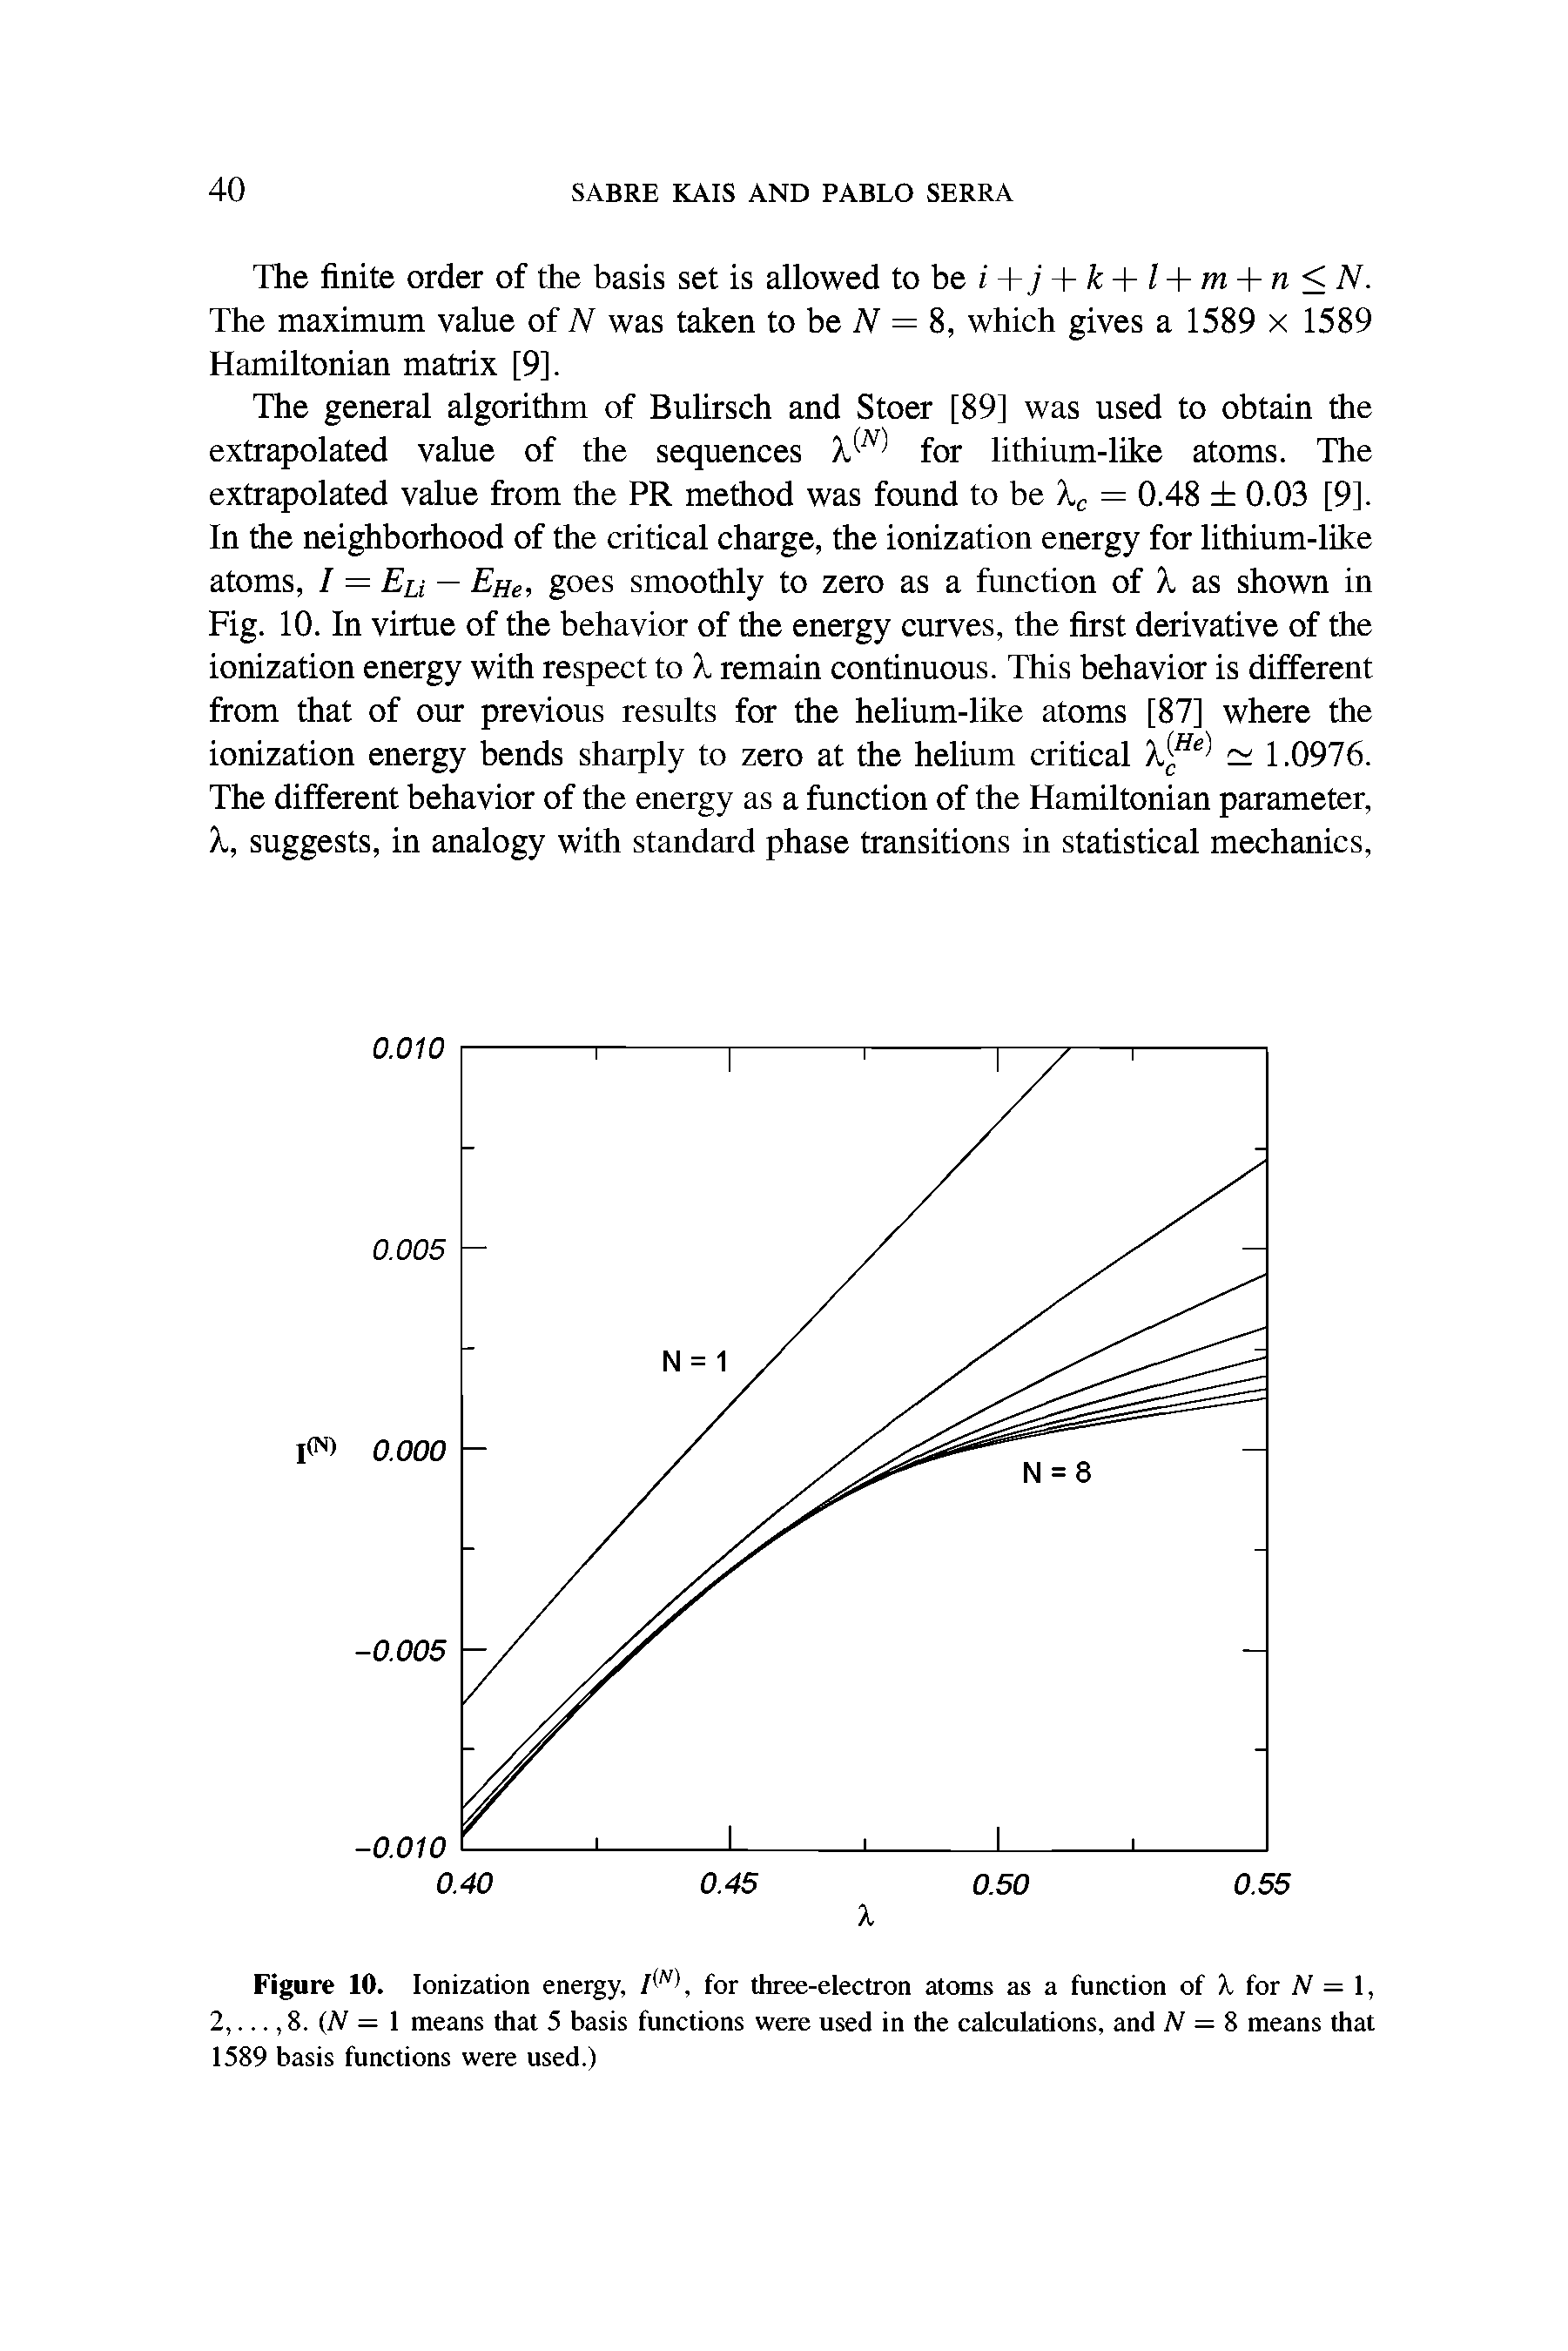 Figure 10. Ionization energy, 1<N>, for three-electron atoms as a function of X for N = 1, 2,..., 8. (N = 1 means that 5 basis functions were used in the calculations, and N = 8 means that 1589 basis functions were used.)...